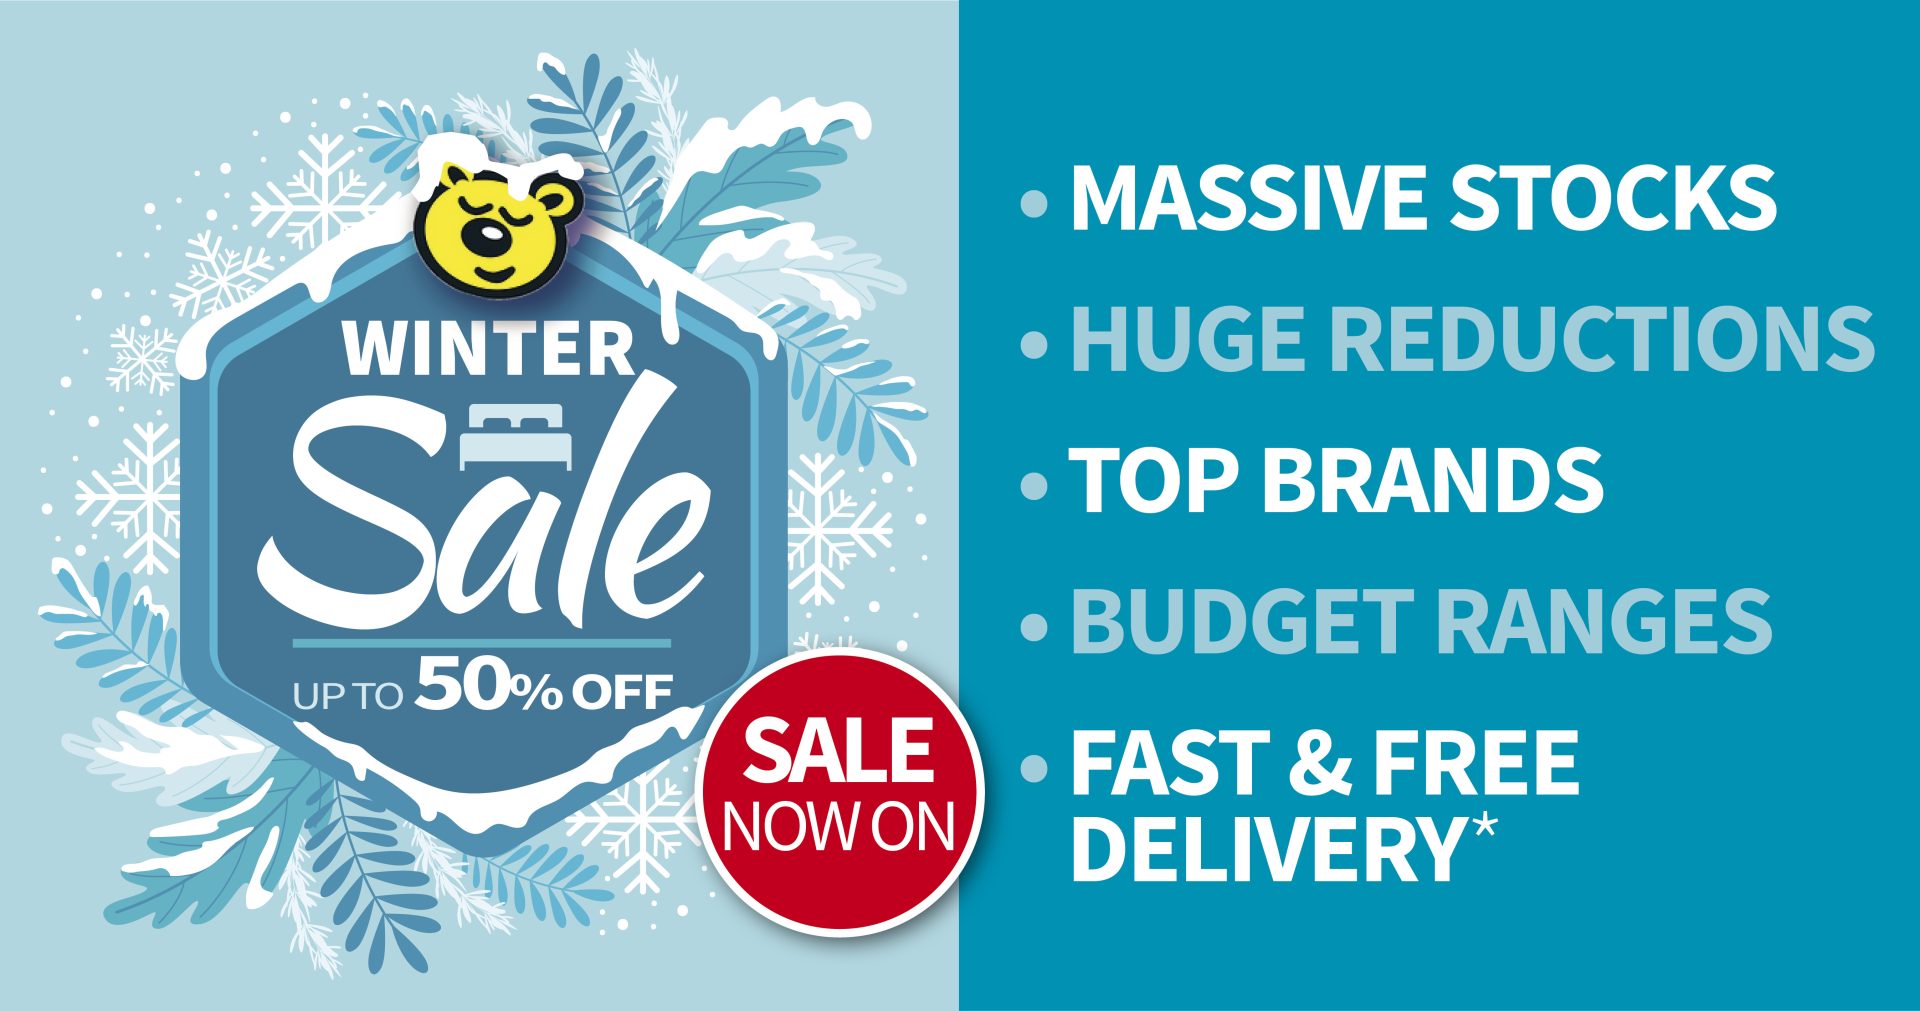 Winter bed sale now on